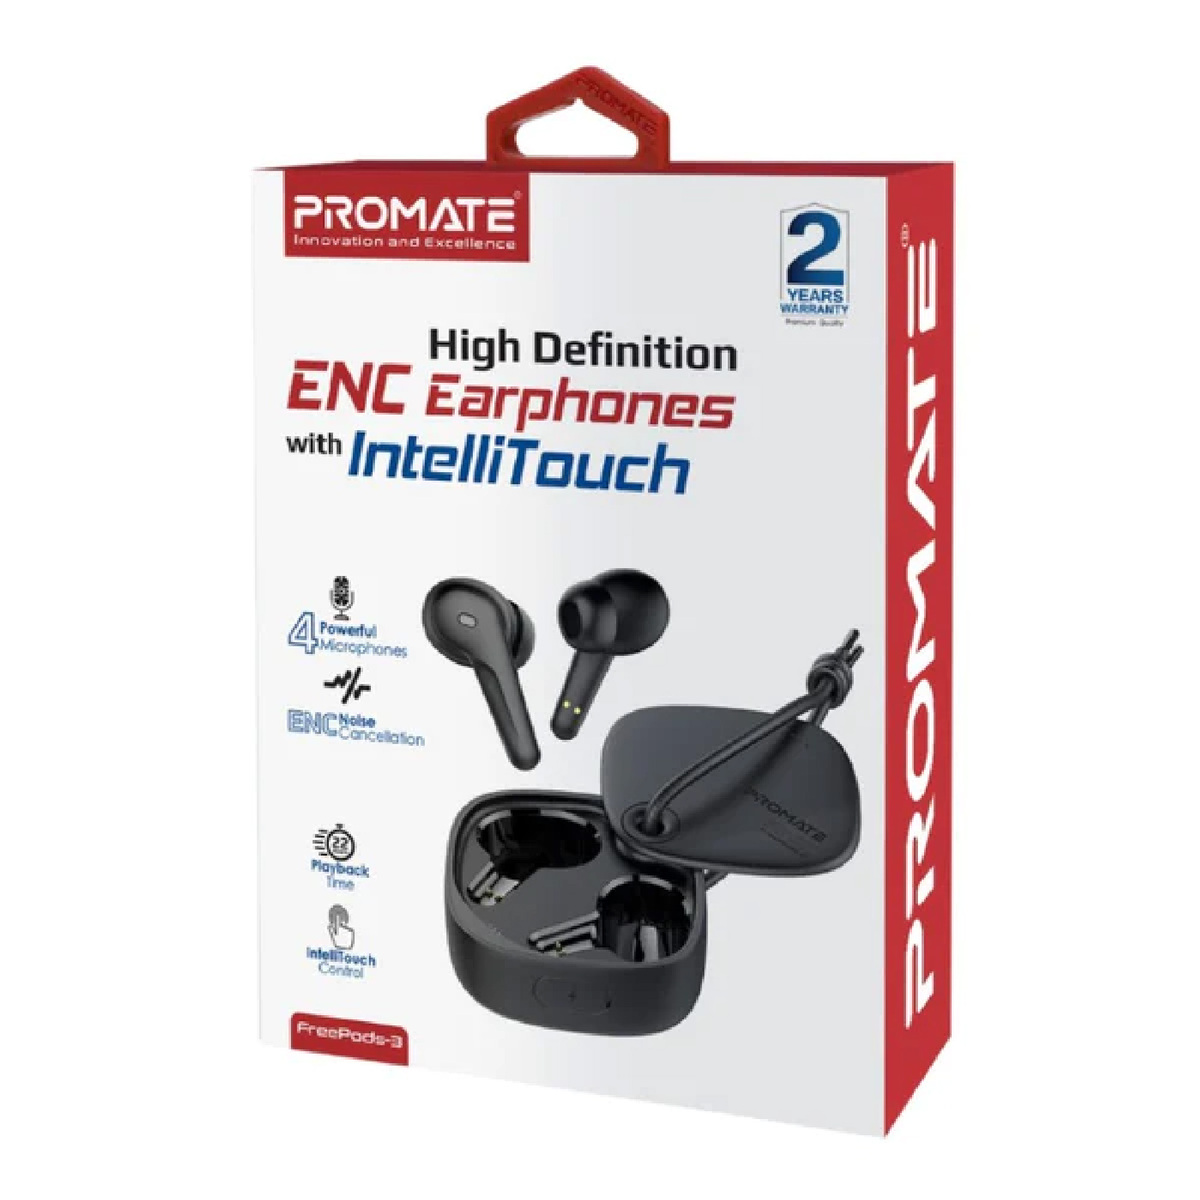 Promate High Definition ENC Earphones With IntelliTouch FreePods-3 Assorted Color